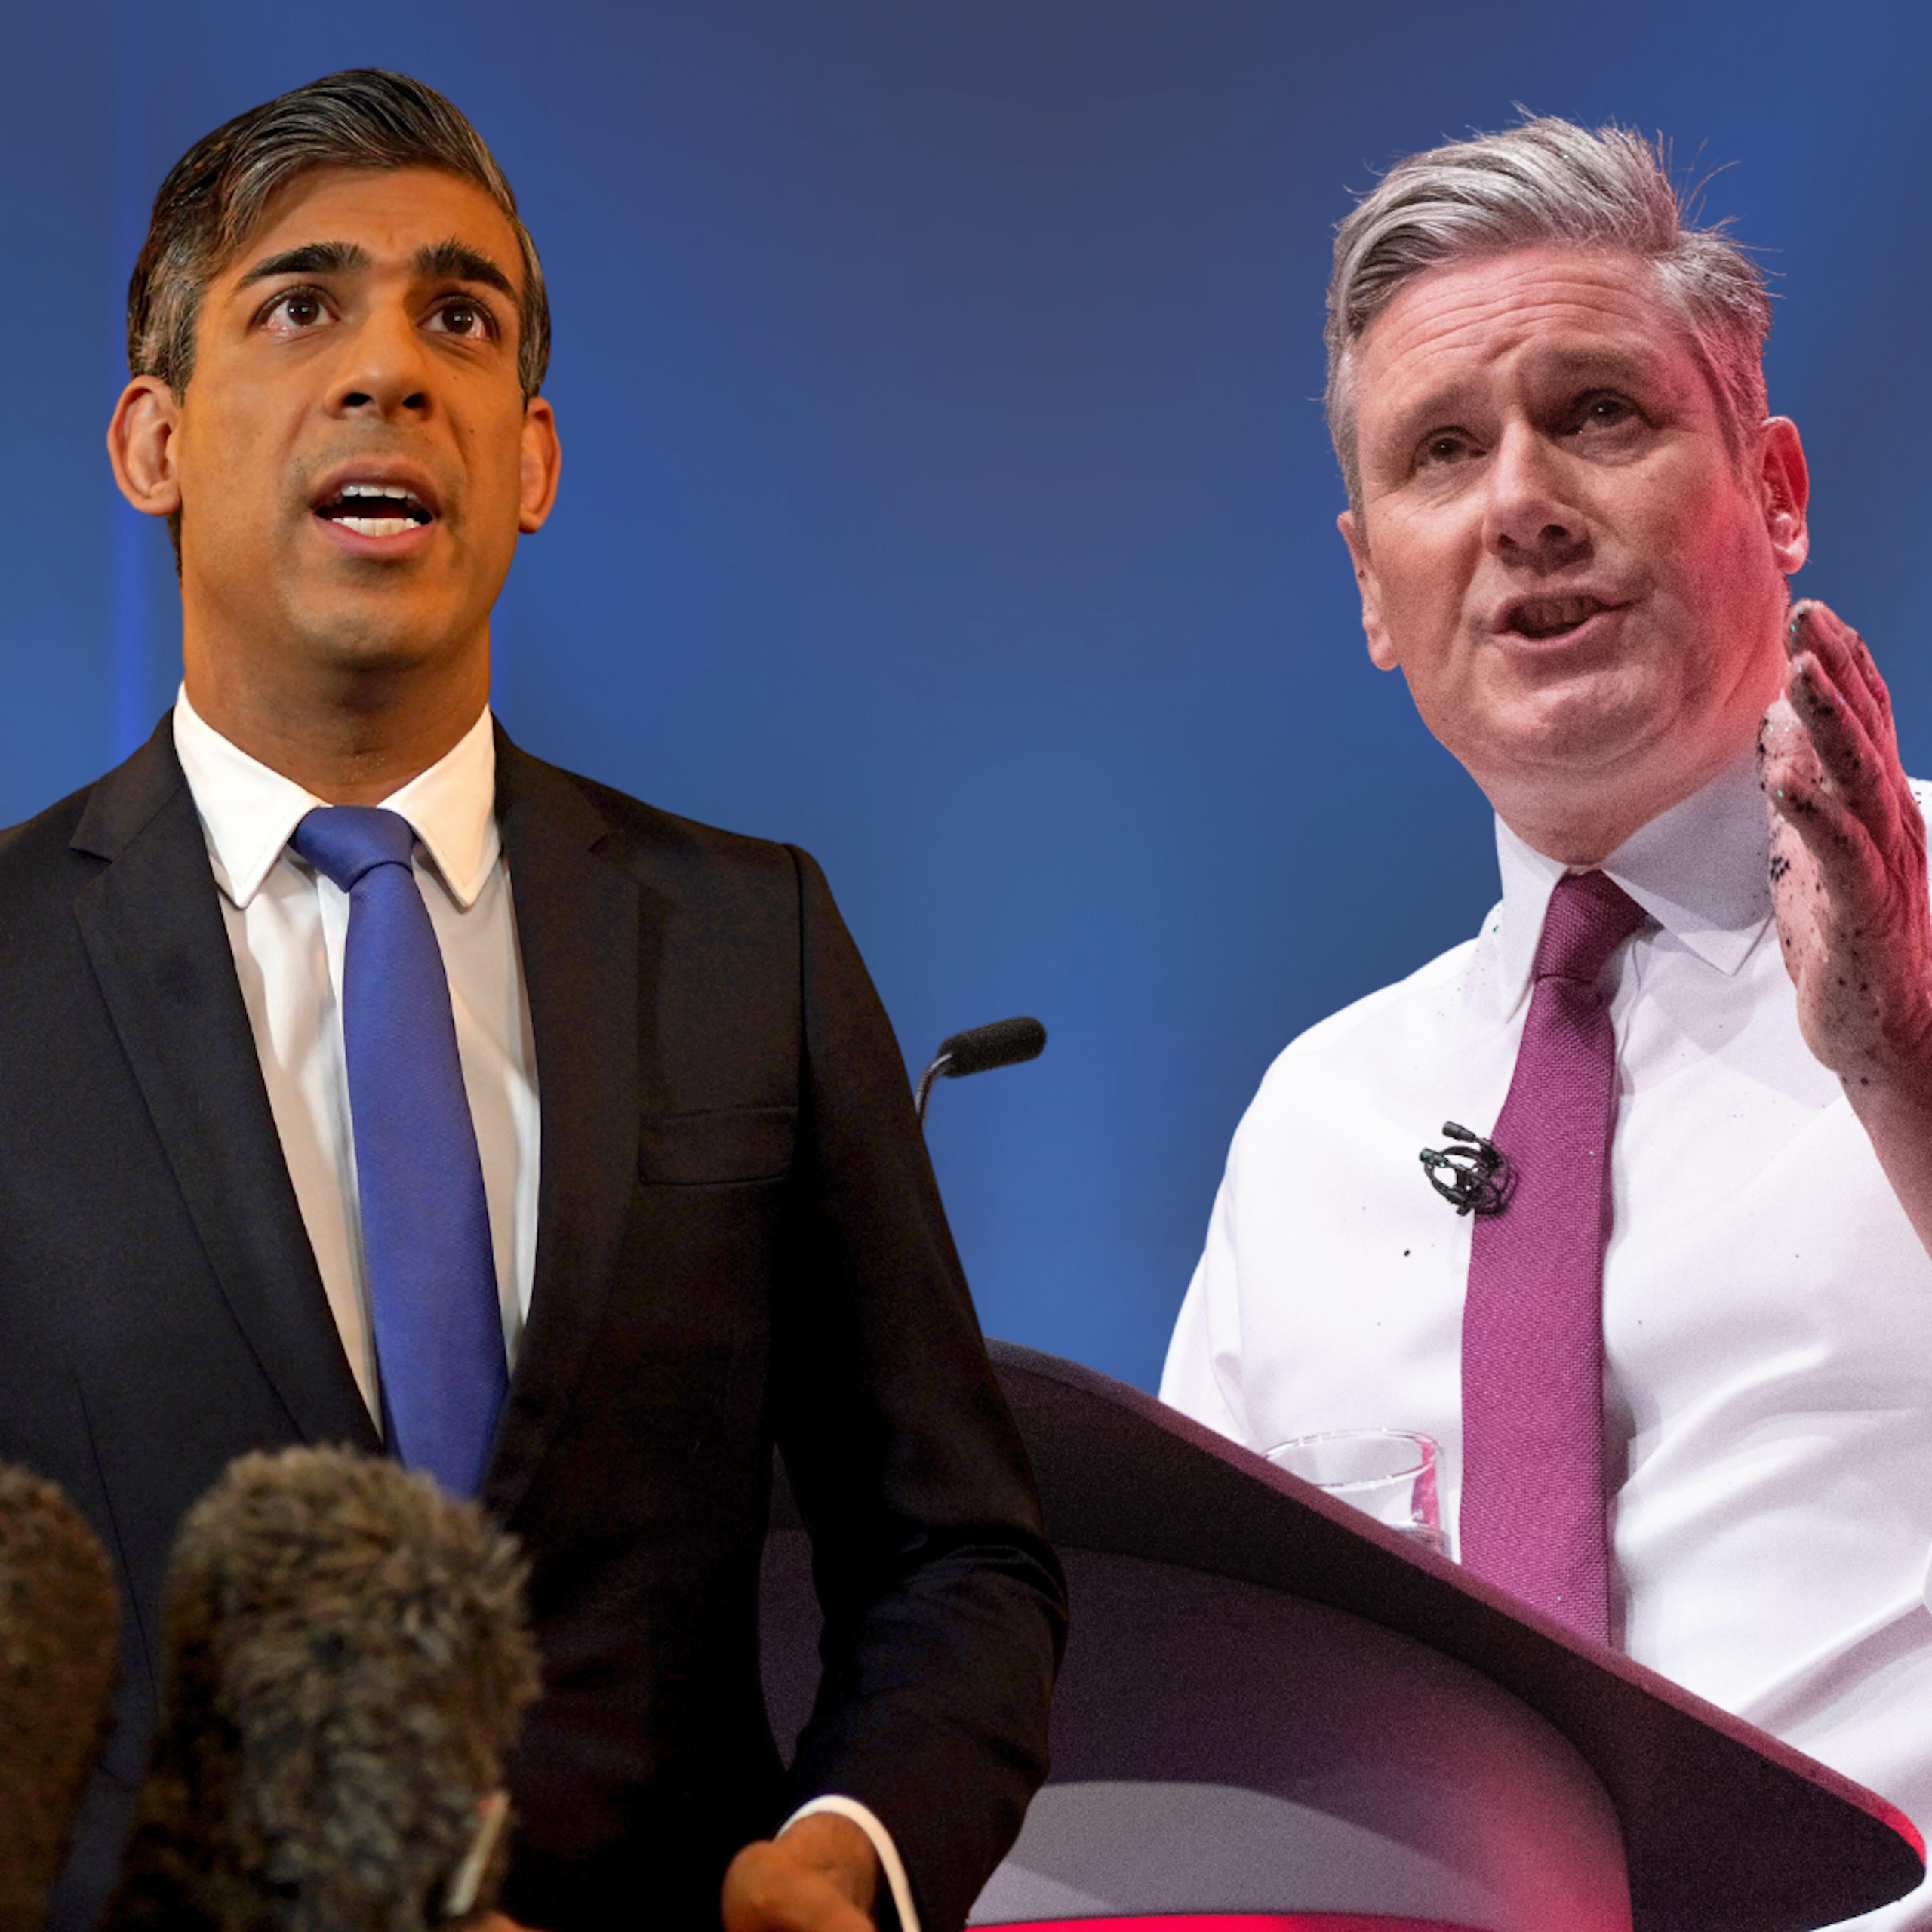 Photo collage of Rishi Sunak and Keir Starmer, both speaking to microphones, in front of a blue stage background